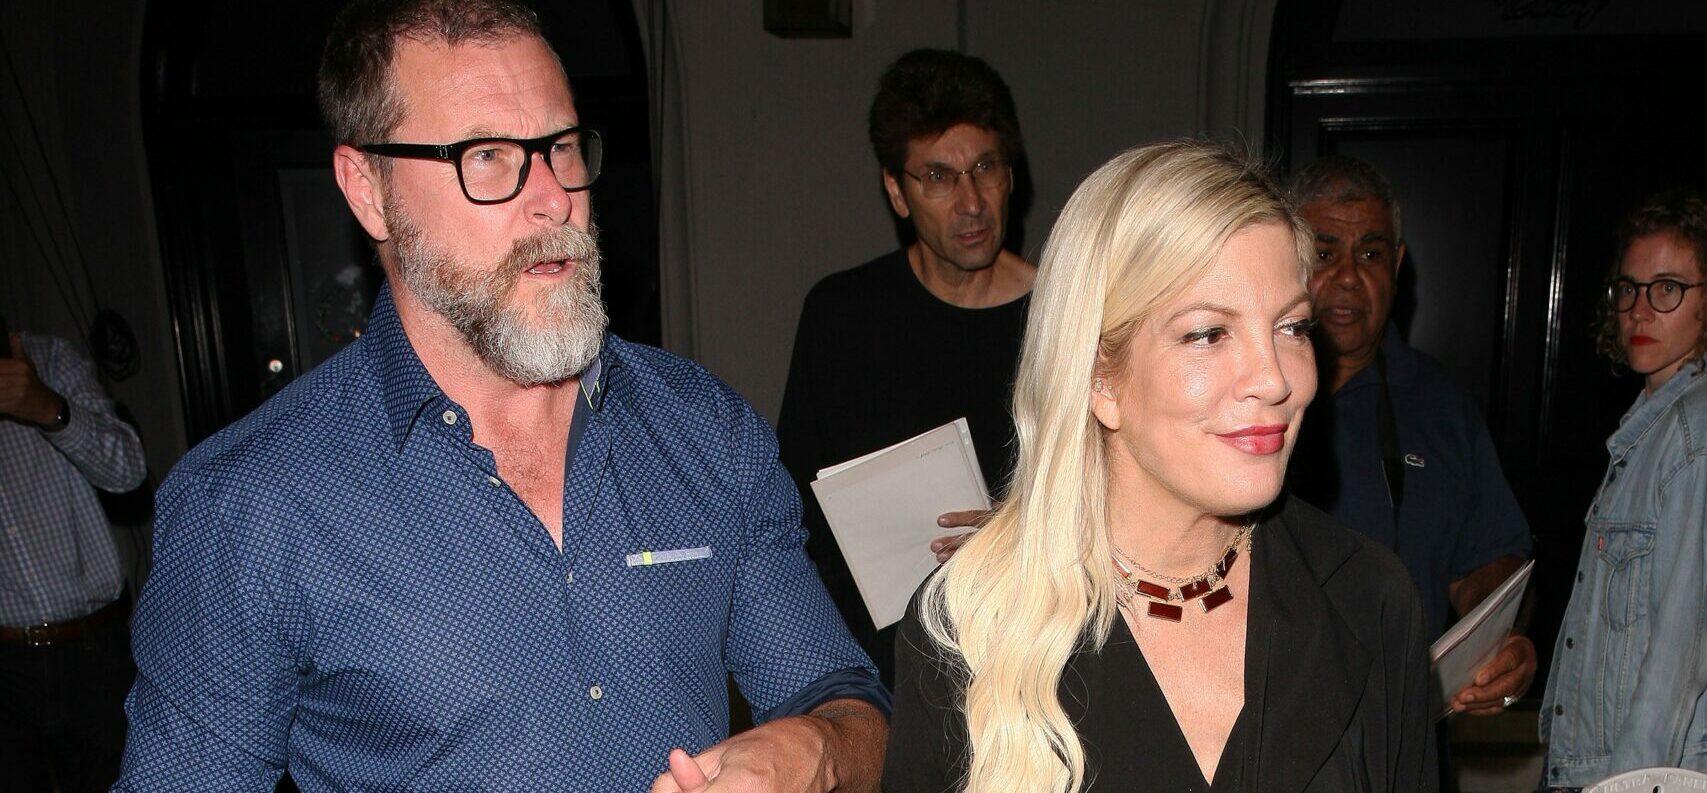 Tori Spelling’s Husband Gets Into BRAWL During Local Men’s Hockey Match